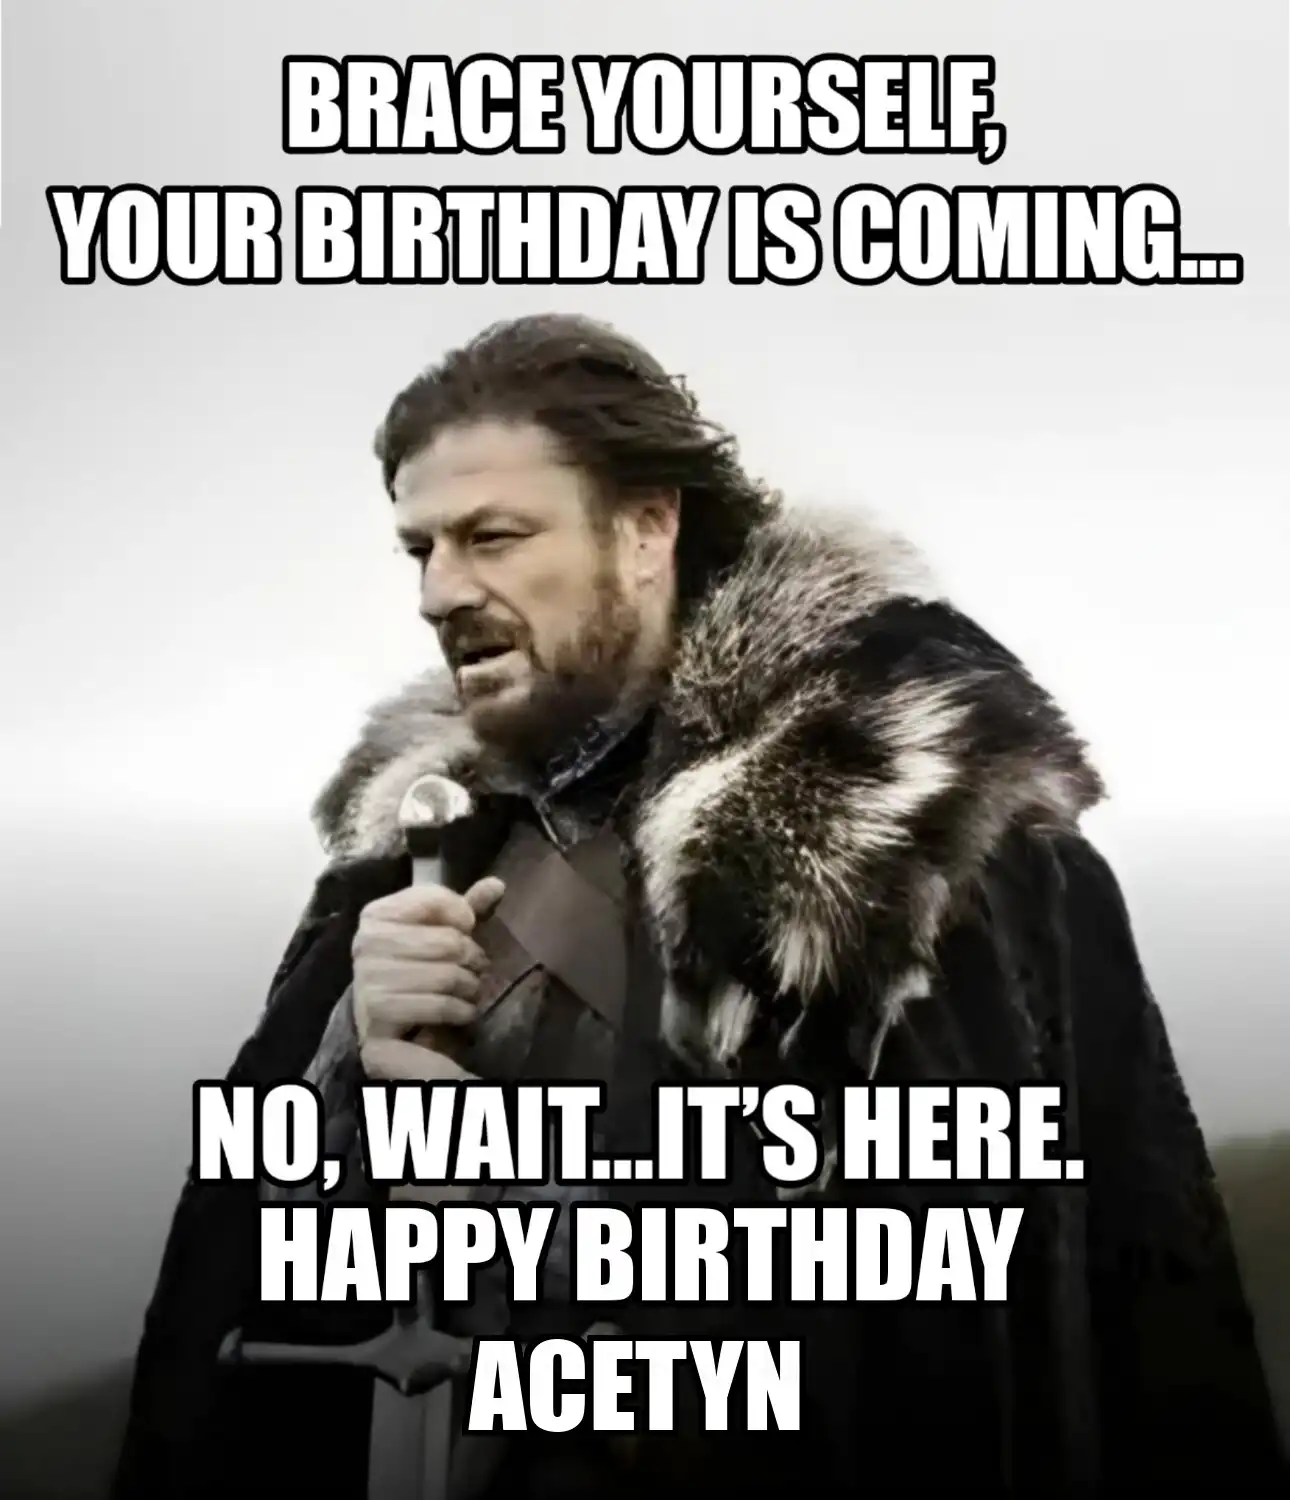 Happy Birthday Acetyn Brace Yourself Your Birthday Is Coming Meme